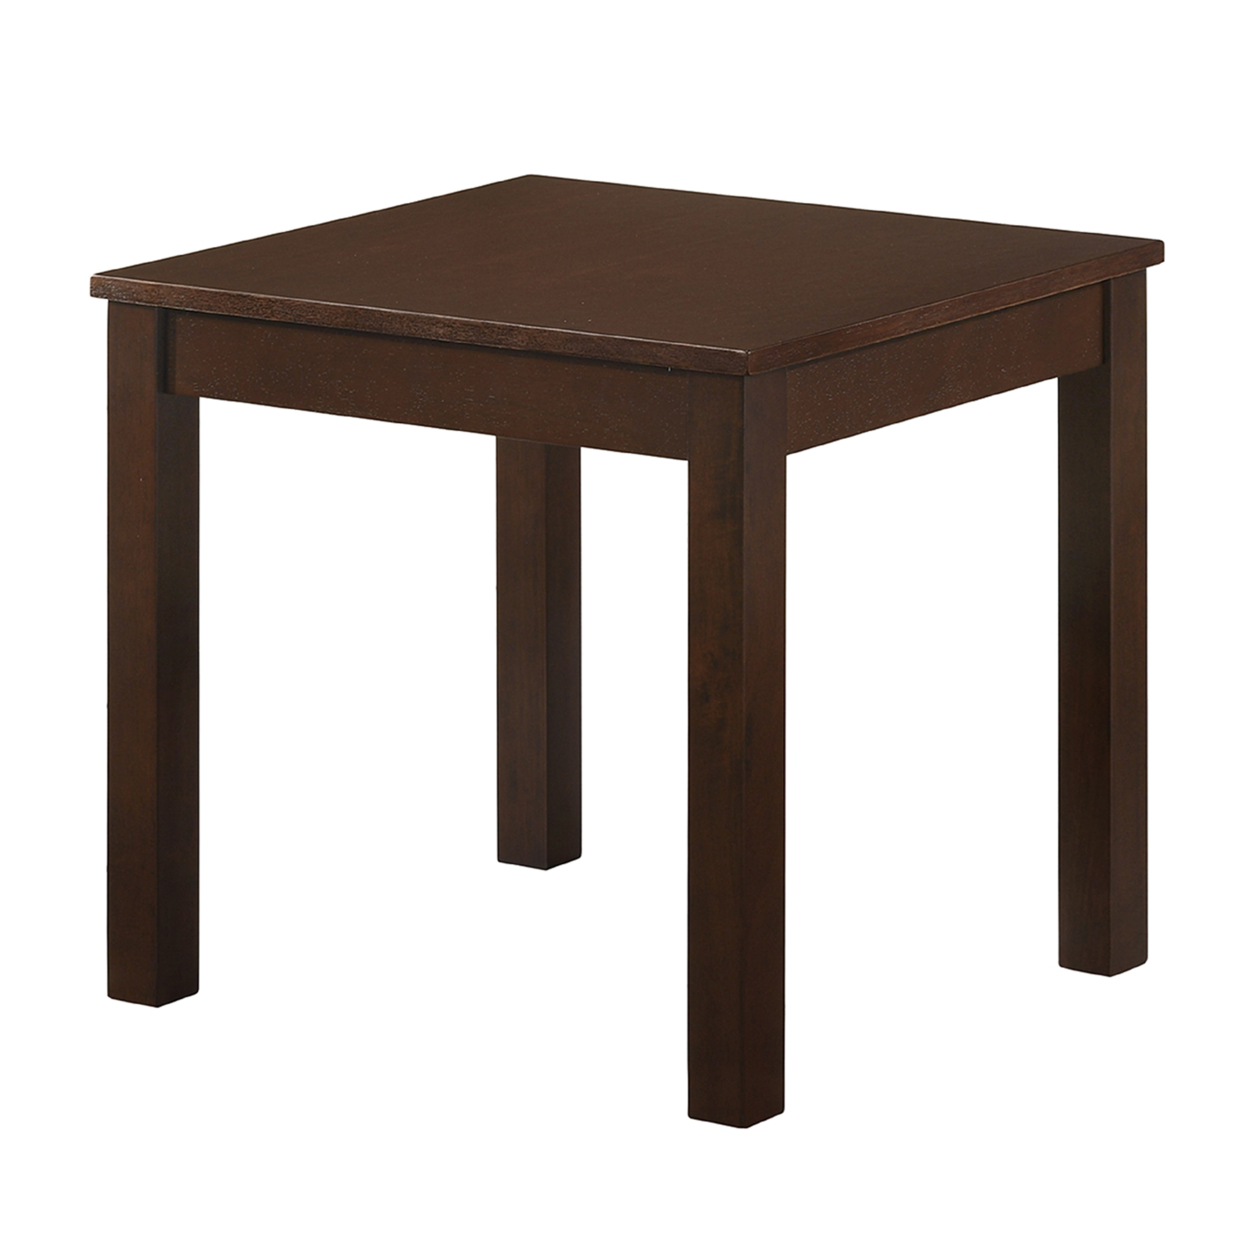 3 Piece Wooden Cocktail And End Table With Block Legs, Brown- Saltoro Sherpi